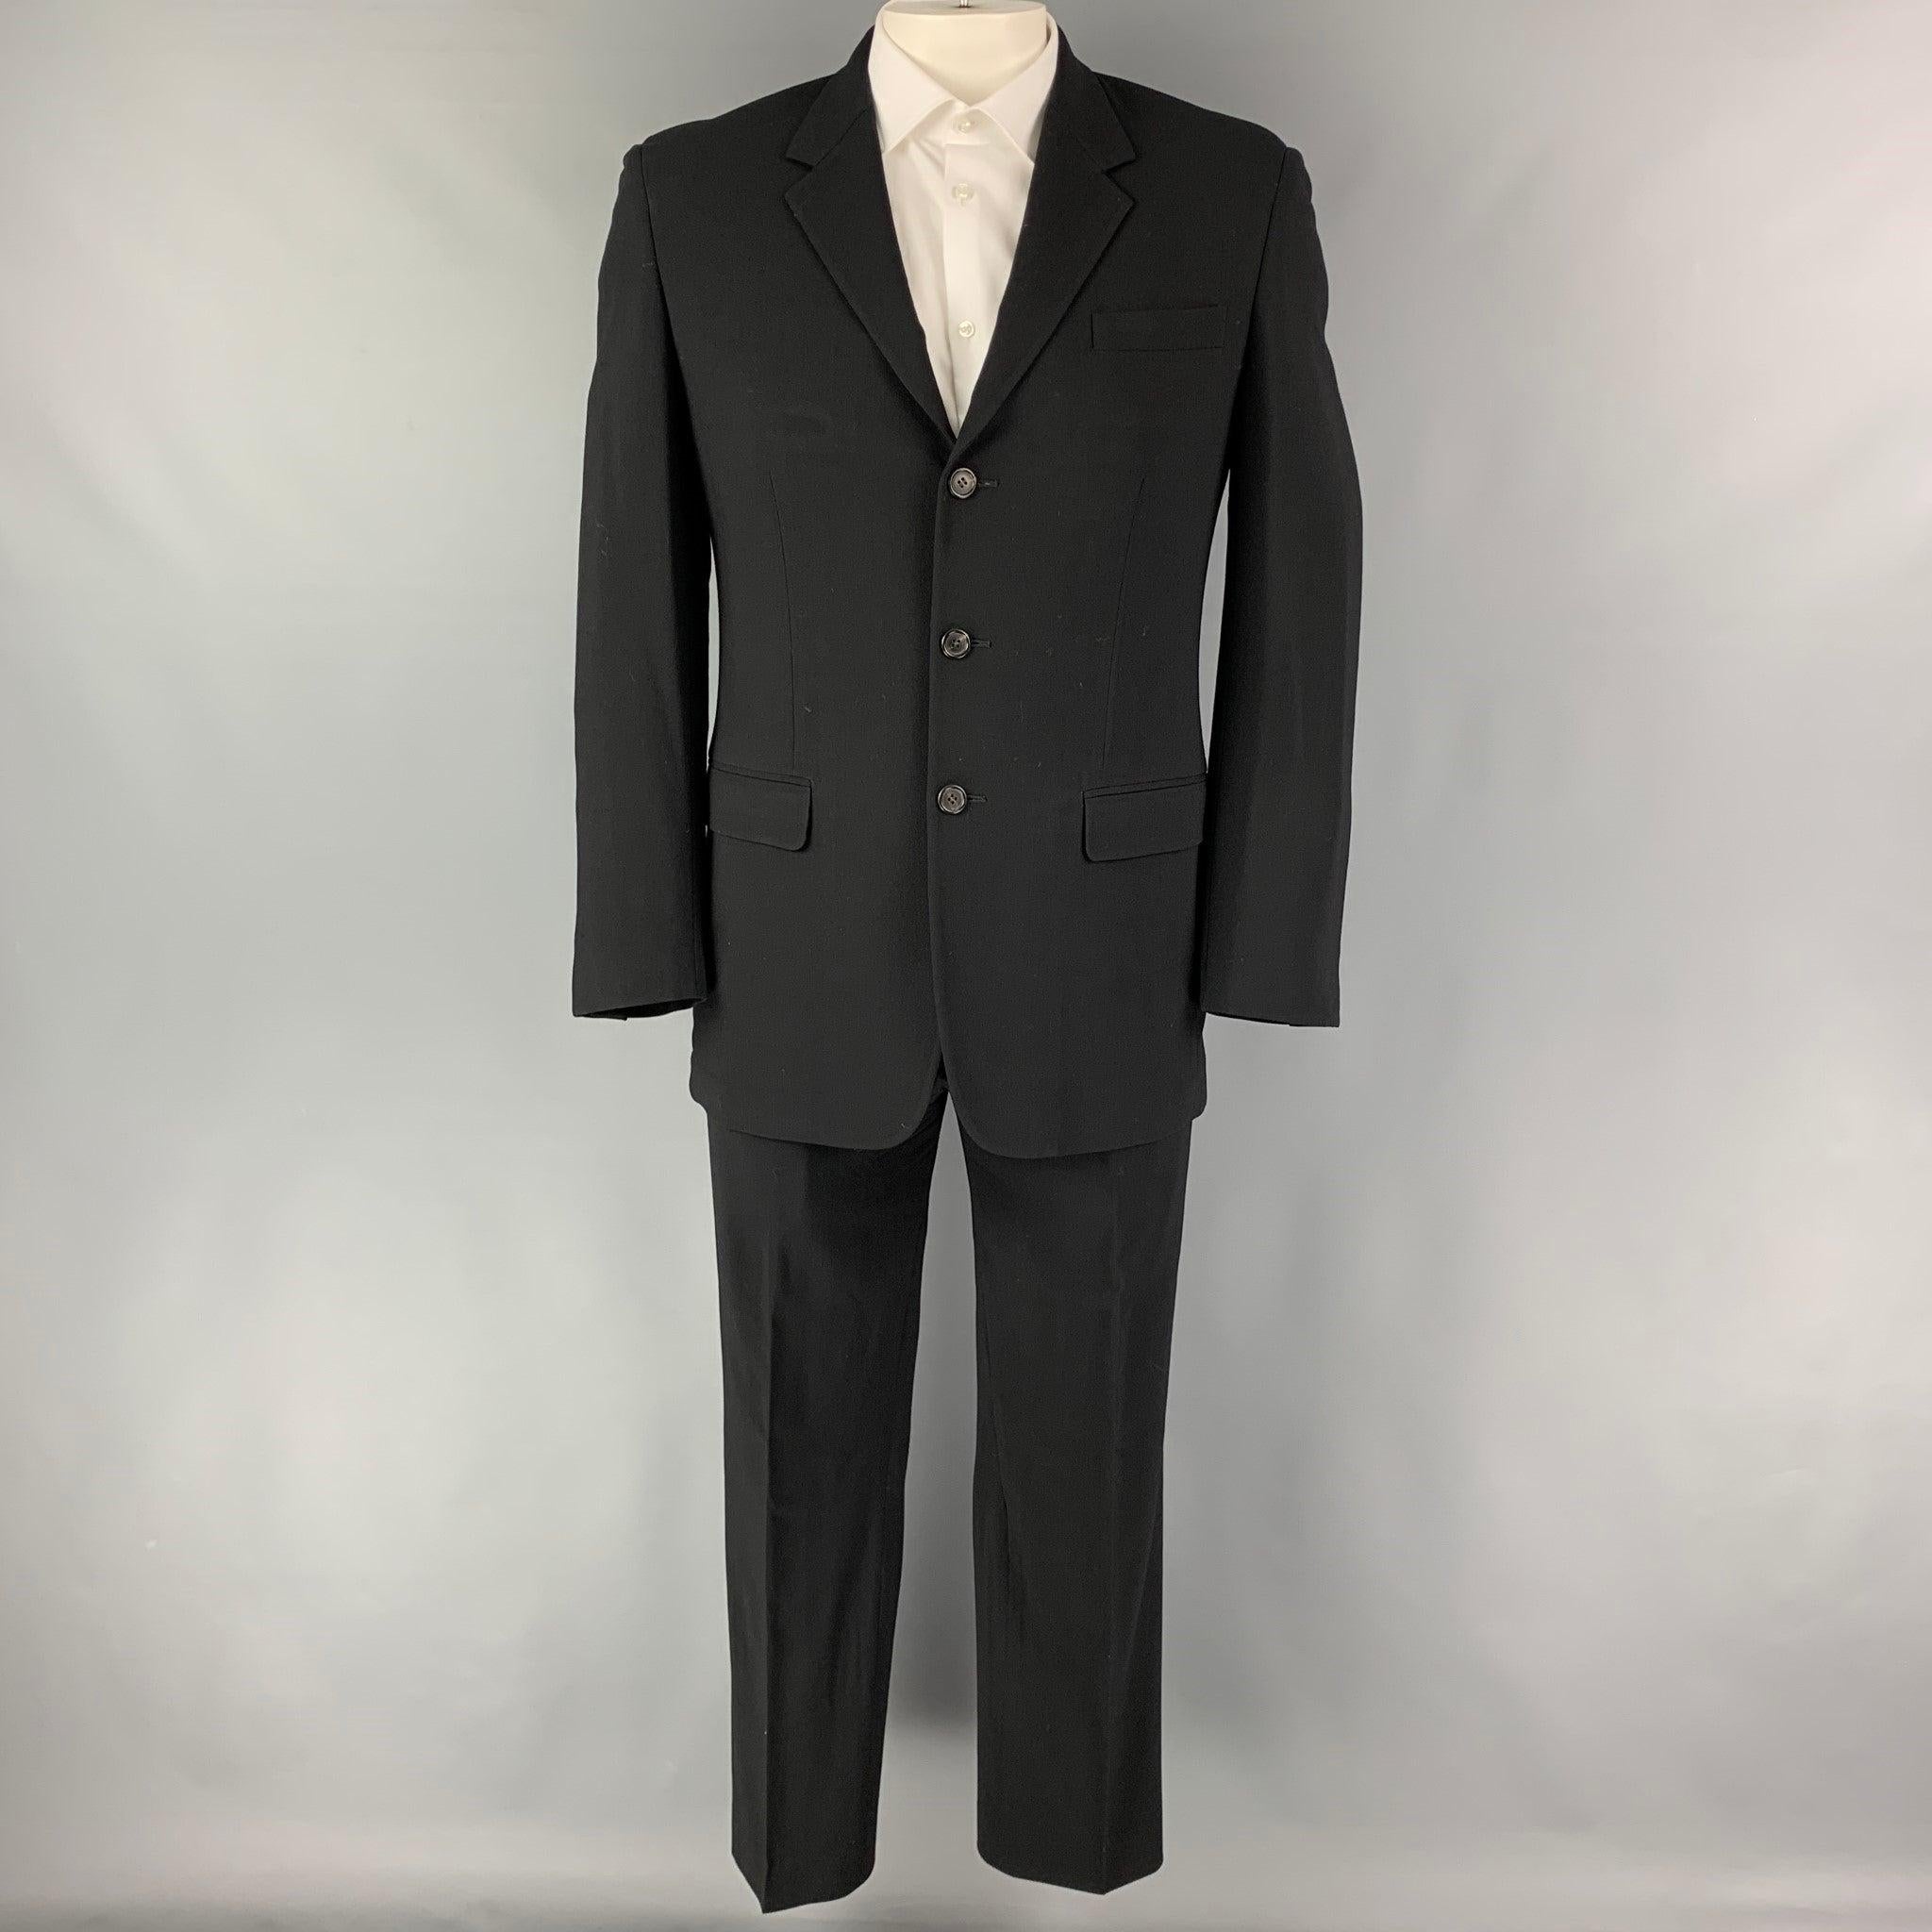 PRADA
suit comes in black virgin wool with a full liner and includes a single breasted, three button sport coat with notch lapel and matching flat front trousers. Made in Italy. Very Good Pre-Owned Condition. 

Marked:   52 

Measurements: 
 